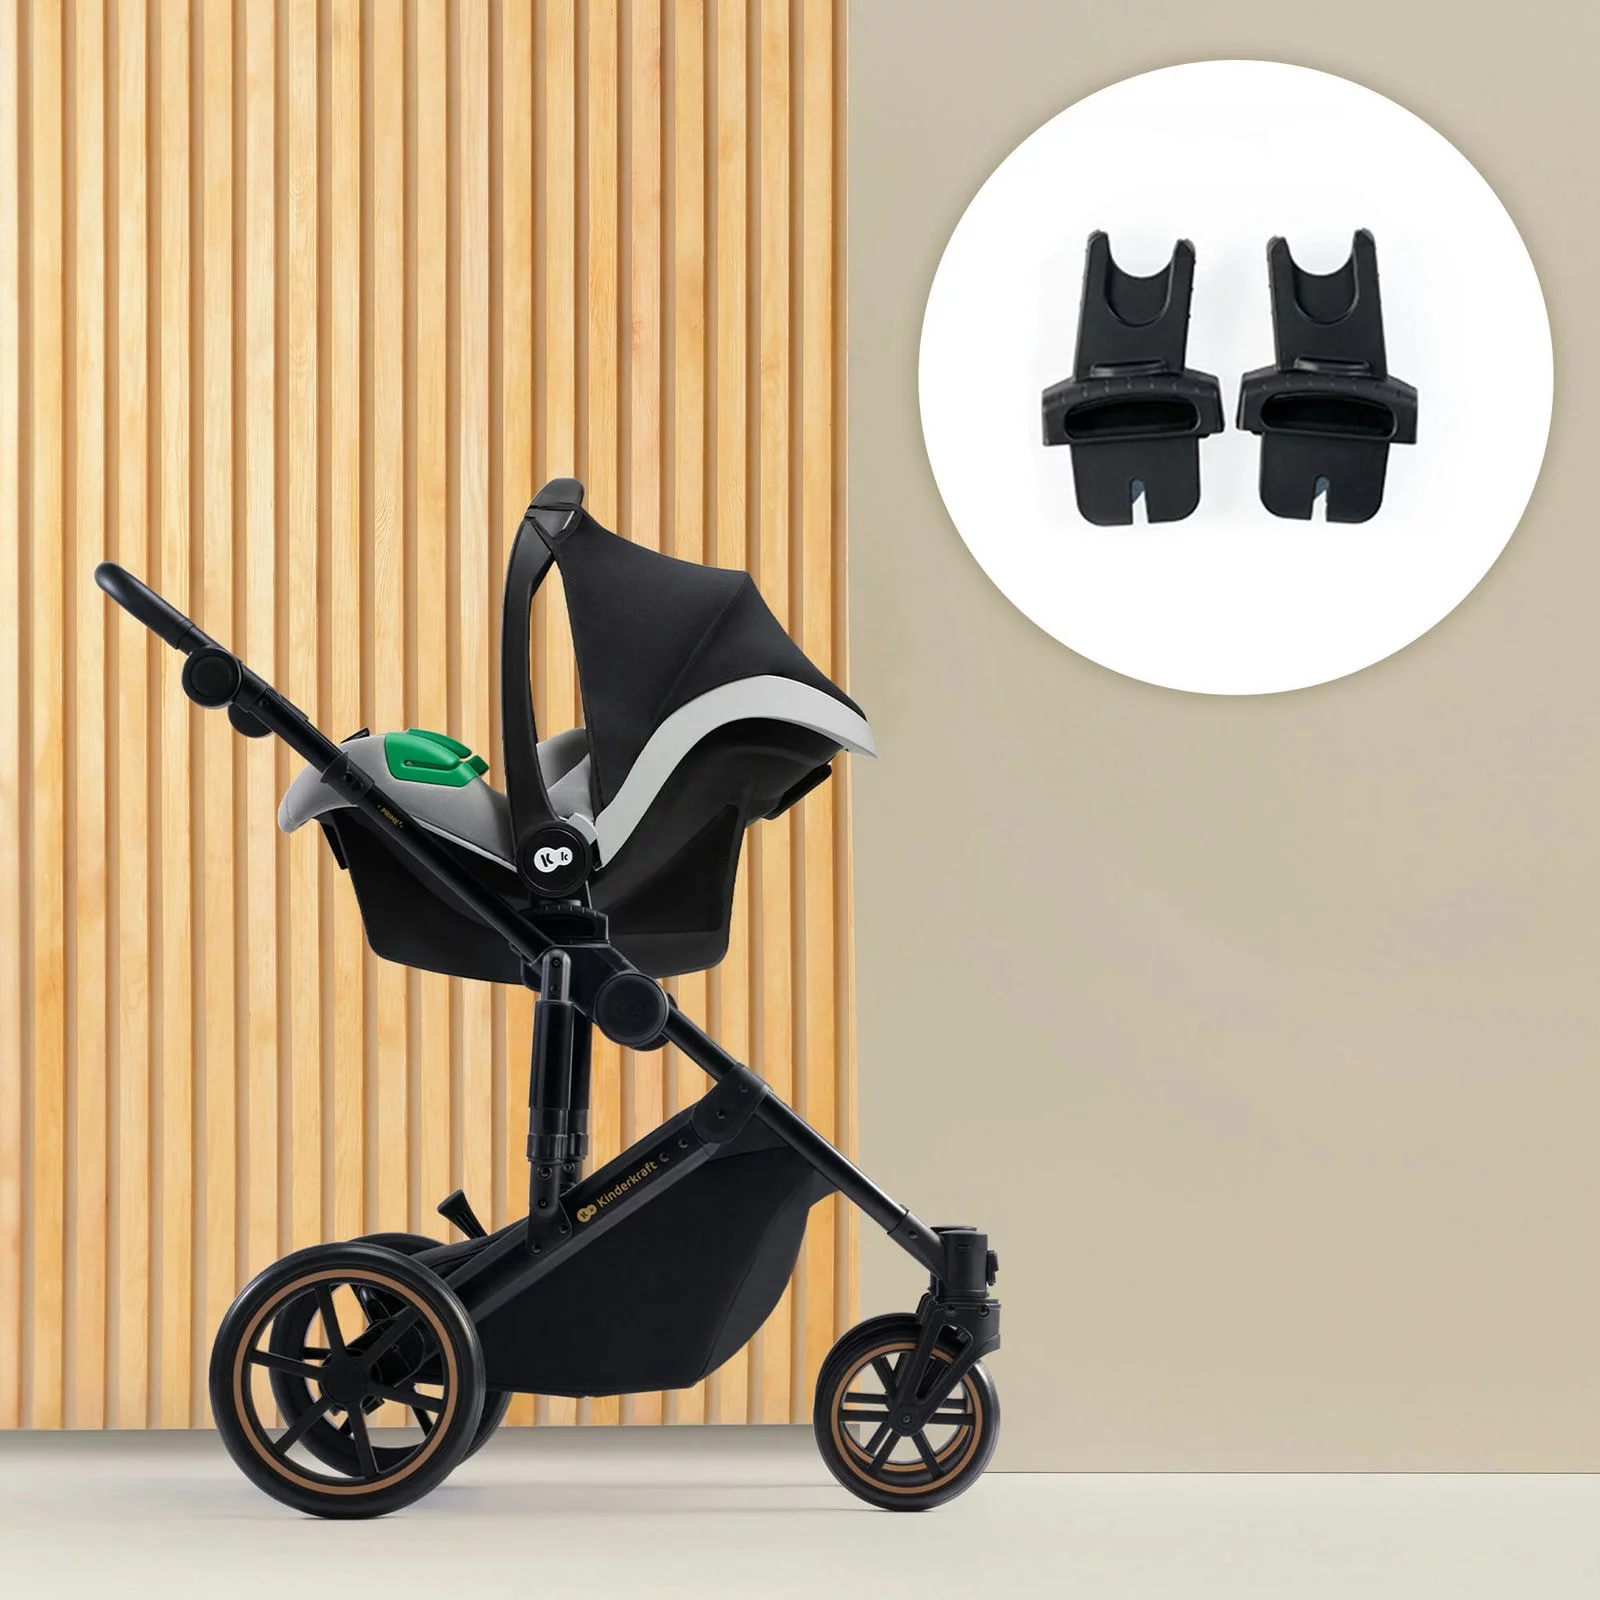 The car seat can be affixed to the pushchair frame	